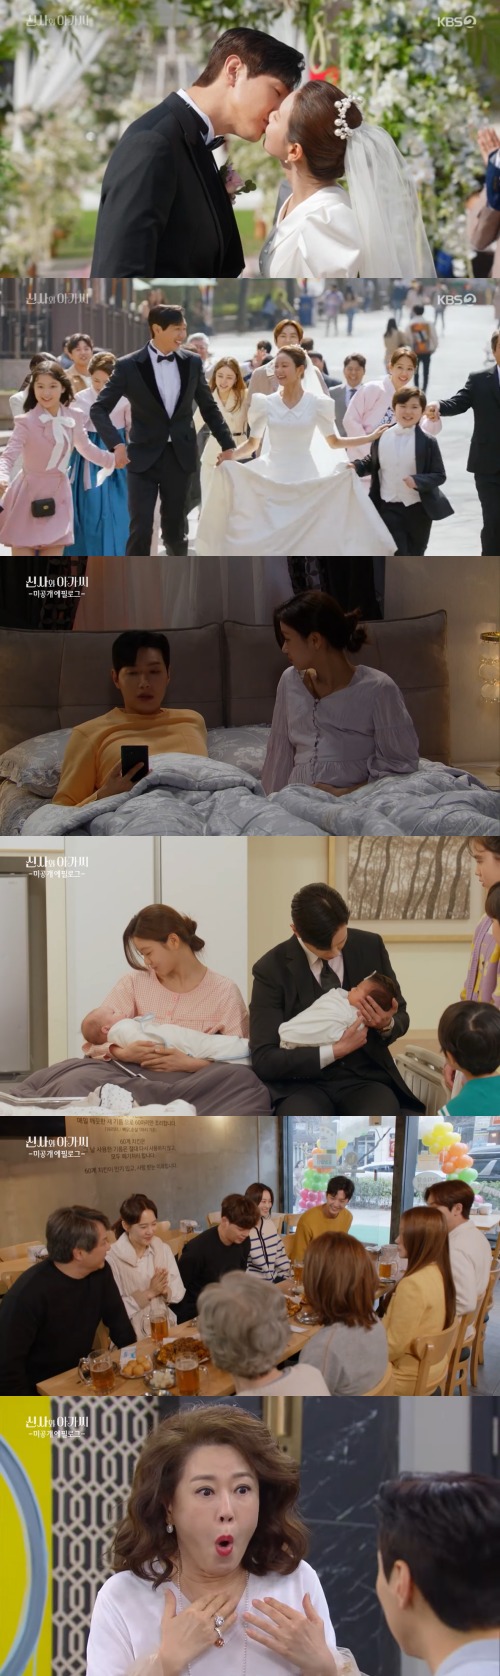 Seoul = = Gentleman and young lady revealed some of Lee Se-hee and Ji Hyun Woos marriage through an undisclosed epilogue.In KBS 2TV weekend drama Shinto and Young Lady (played by Kim Sa-kyung/directed by Shin Chang-seok), which was broadcast on the 27th, Park Dae-dan (Lee Se-hee) and Lee Young-guk (Ji Hyun Woo) married safely.Park had expected Lee to propose to Park, who had bought a proposal ring for Park, but he hesitated, saying, It would be strange to give it to him while eating meat.Park Dan-dan predicted that when Ice cream came out for dessert, it would be in Ice cream; I scoured Ice cream, but there was no ring.Park thought, Youre trying to stay quiet. Lee Yeong-guk waited for a better time.When he did not give me the ring until he broke up, Park said, Do you have anything to say to me, have you forgotten? Lee said shyly, Lets meet in our dreams.When the children heard that Lee Yeong-guk and Park Dan-dan were getting married, they liked it. Lee Jae-ni asked how he was going to propose.Lee Jae-ni called Park Dan-dan, saying he had something to consult. When Park Dan-dan arrived at the restaurant, Lee Young-guk was singing.Lee Young-guk knelt down and proposed, and Park Dan-dan smiled brightly and accepted the proposal.Lee Young-guk found the lost mothers ring and gave it to Park Dan-dan. Park Dan-dan asked, Is it a precious ring that your mother wore, and I deserve to join? Lee Young-guk said, Of course.He is now my wife. Park Dan Dan was delighted to receive the ring, but Lee Se-ryeon (Yoon Jin-i)s tears caught my mind. Park Dan gave the ring back to Lee Young-guk.This ring is not me, but my big wife. Lee said it was ridiculous. It is not yet for me.And Im too young to wear this huge ring.I heard a little about this ring, but if my big wife was dead, would it be? He said, I think my heart will be comfortable if I give it to my big wife. Wang Dae-ran (Cha Hwa-yeon), who received the ring, refused, saying, I am a sinner. If you get this ring, you are a bad woman. Just give me Park.I appreciate it just for giving it to me. I can not die now. Lee said that he would feel comfortable if he received the ring.Park Dan-dan put the ring in the hands of Wang Dae-ran. Park said, I can marry the president comfortably. If you want to give me, you can pass it on later.Wang Dae-ran embraced Park Dan-dan and gave it a flurry.Park Dan and Lee Young-guk married while receiving family celebrations. Lee Se-chan (Yoo Jun-seo) and Lee Sejong (Seo Woo-jin) called Park Dan-dan their mother and laughed, saying, I wish I had a brother.In the epilogue, which was released through the official website and YouTube channel, Lee Young-guk was comically drawn as the pregnant Park Dan-dan said he wanted to eat the bread late at night.When Park Dan-dan gave birth to twins, Lee Se-chan and Sejong mischievously called their twin sisters Negjong and Ohjong.Meanwhile, Cha Gun (Kang Eun-tak), who broke up with Jo Sa-ra (Park Ha-na), set up the second chicken restaurant and took a thumb with the next store president.Anna Kim (Lee Il-hwa) left huge assets to Park Dan-dan, Park Soo-chul (Lee Jong-won) and Cha Yeon-sil (Oh Hyun-kyung). Wang Dae-ran was delighted to know that Lee Se-ryeons stake still remains.